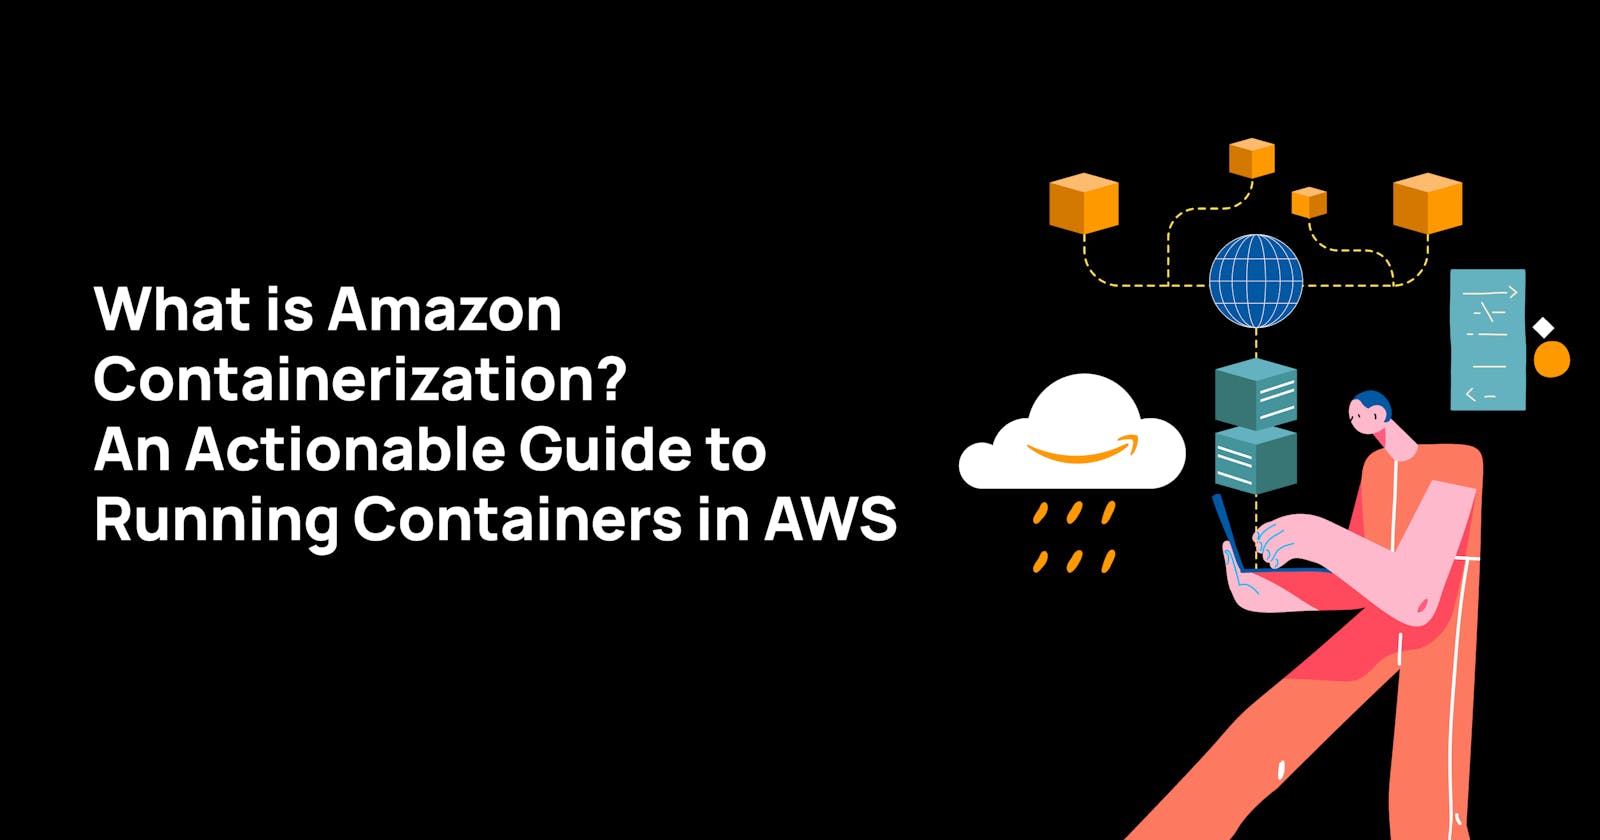 What is Amazon Containerization - An Actionable Guide to Running Containers in AWS